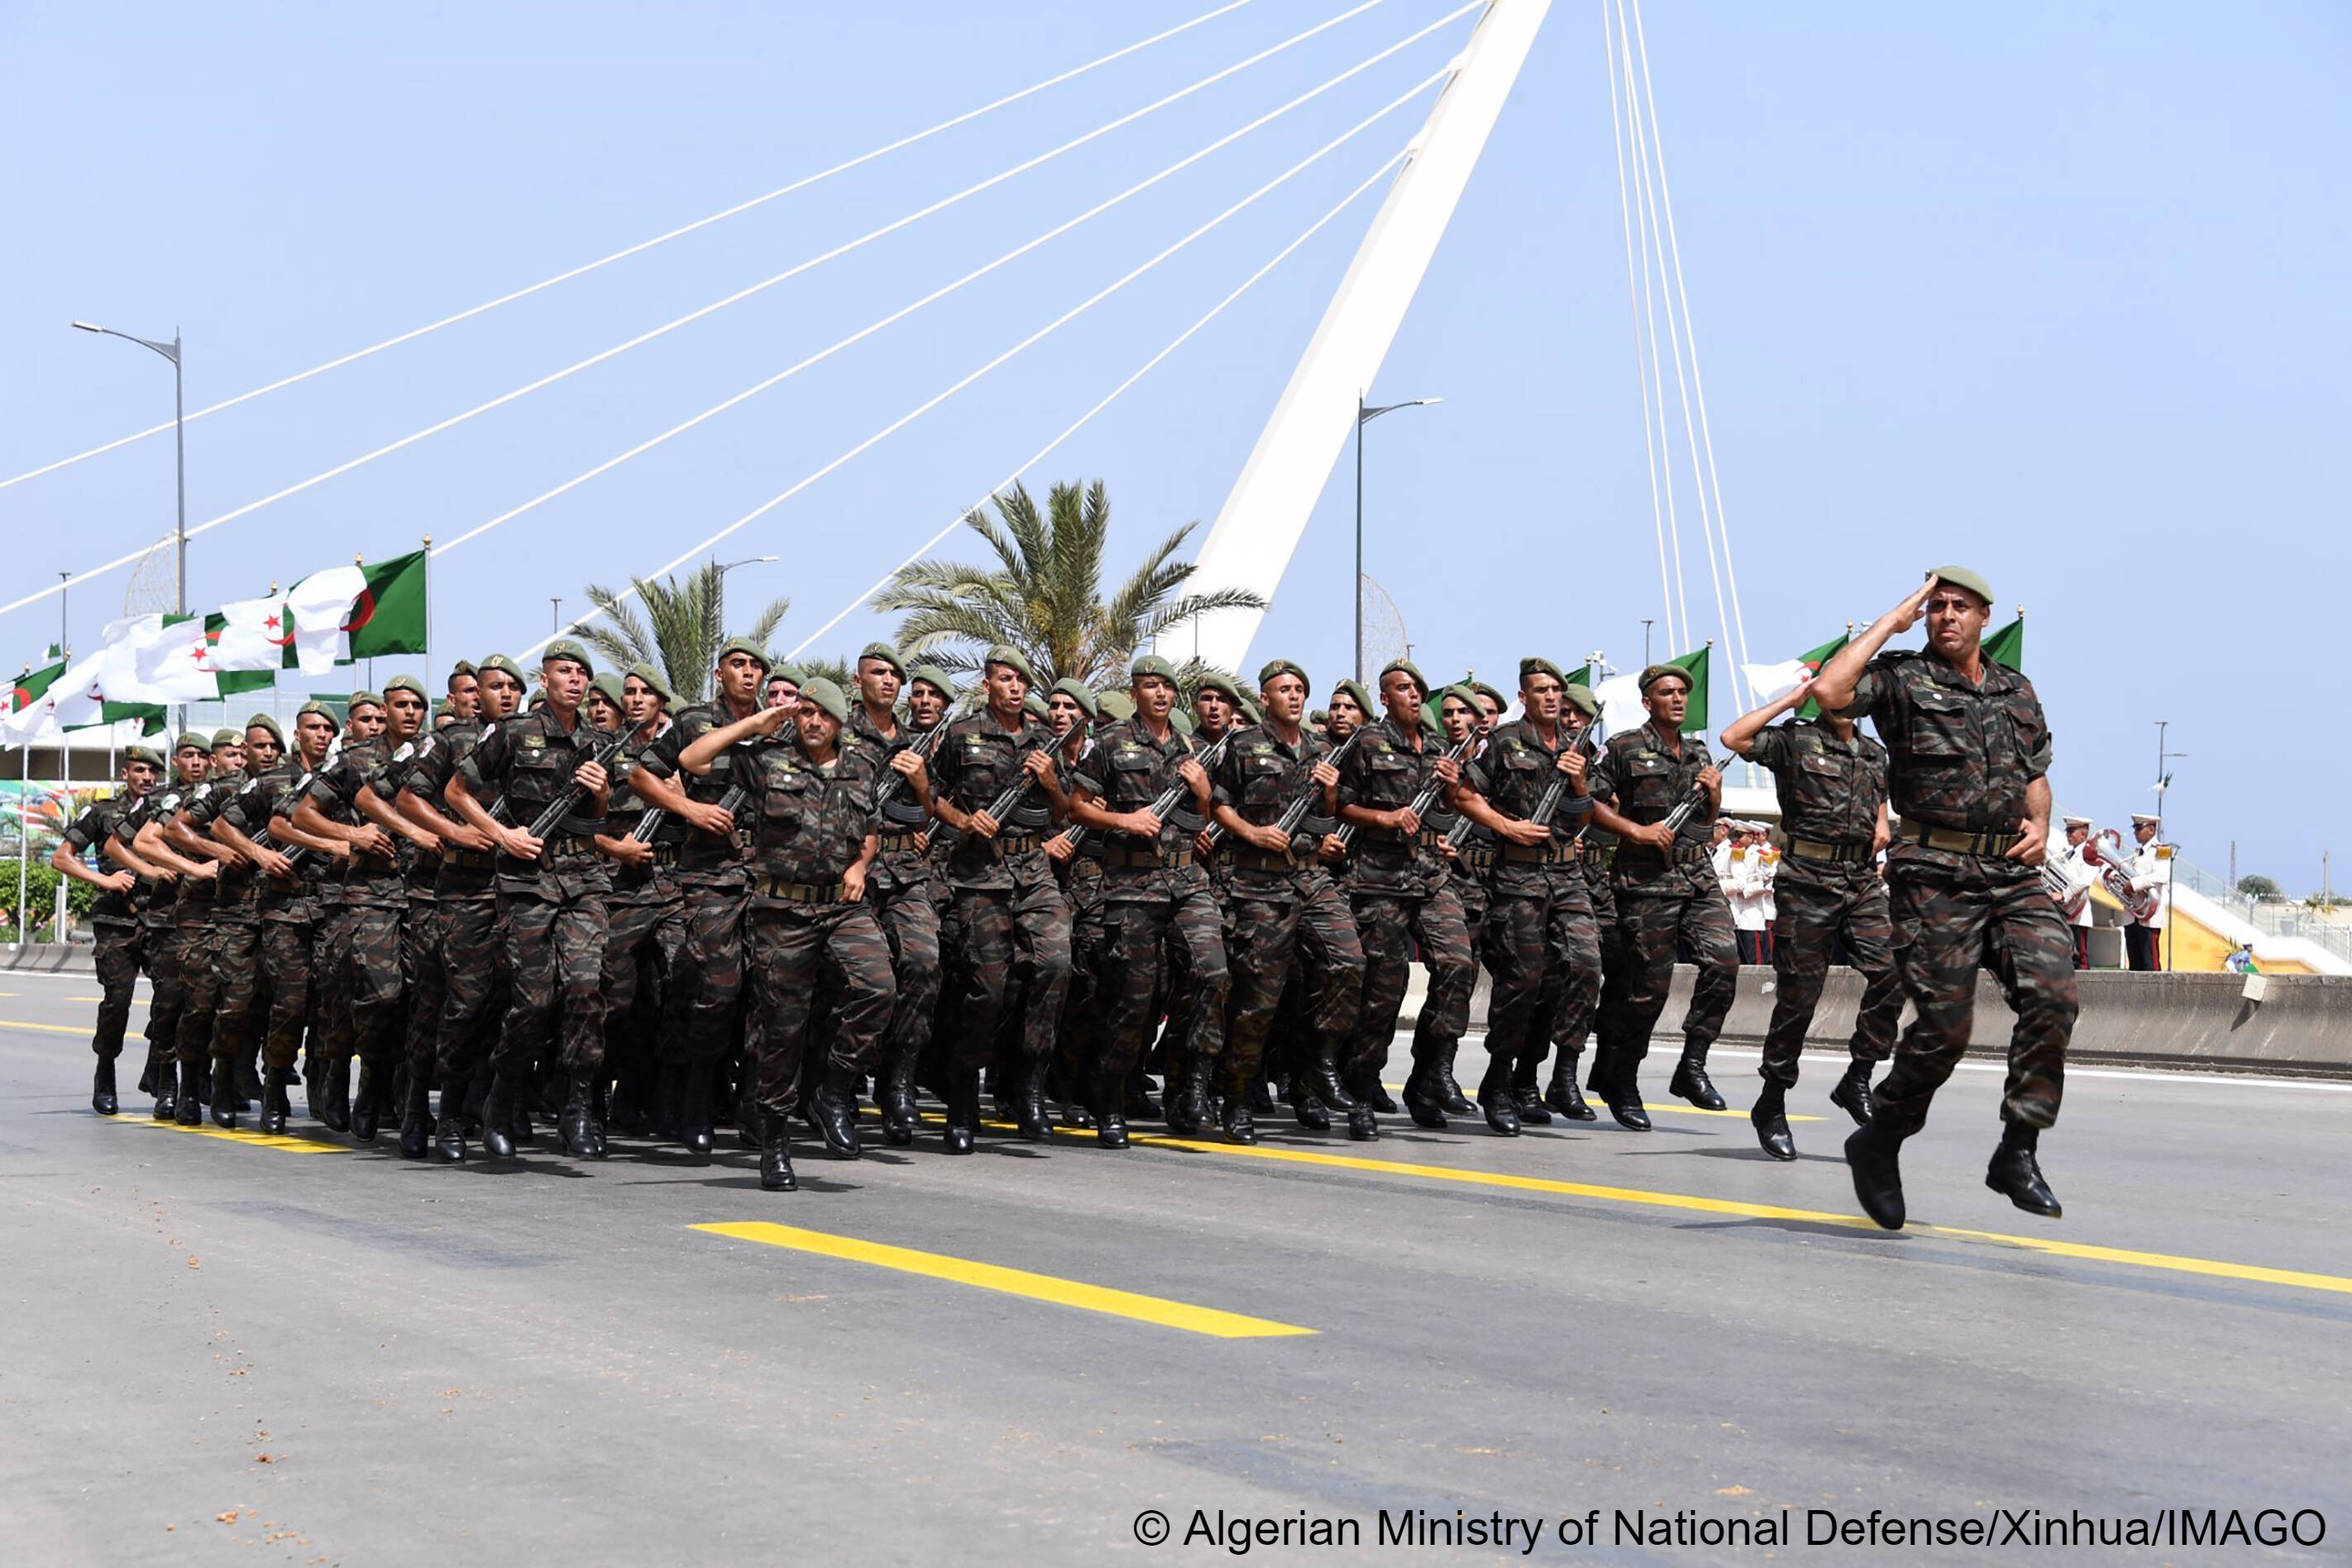 Military parade in Algeria's capital Algiers to mark the 60th anniversary of independence from France on 5 July 2022.